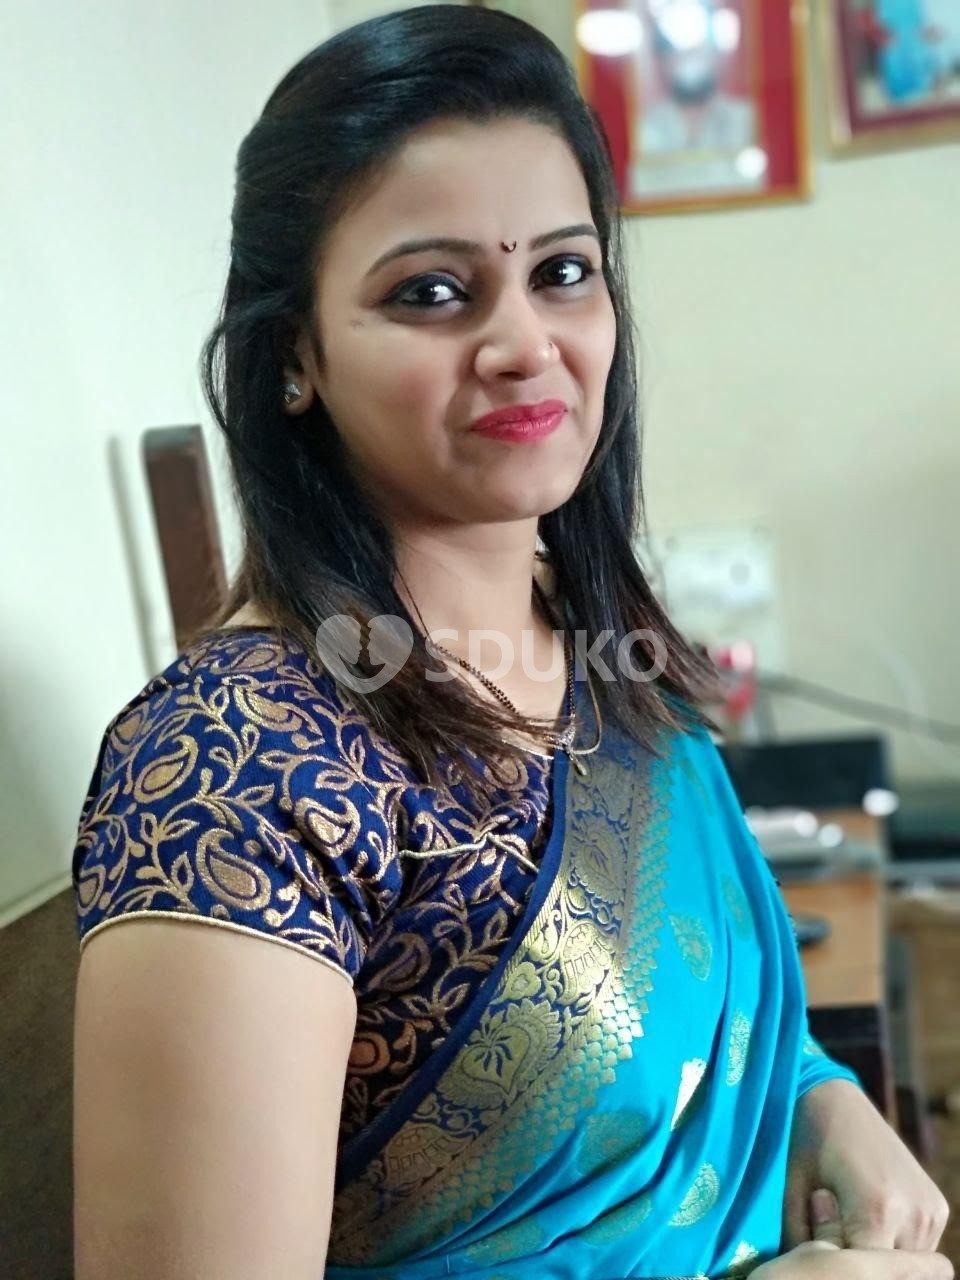 T nagar.......low price 🥰100% SAFE AND SECURE TODAY LOW PRICE UNLIMITED ENJOY HOT COLLEGE GIRL HOUSEWIFE AUNTIES AVAI